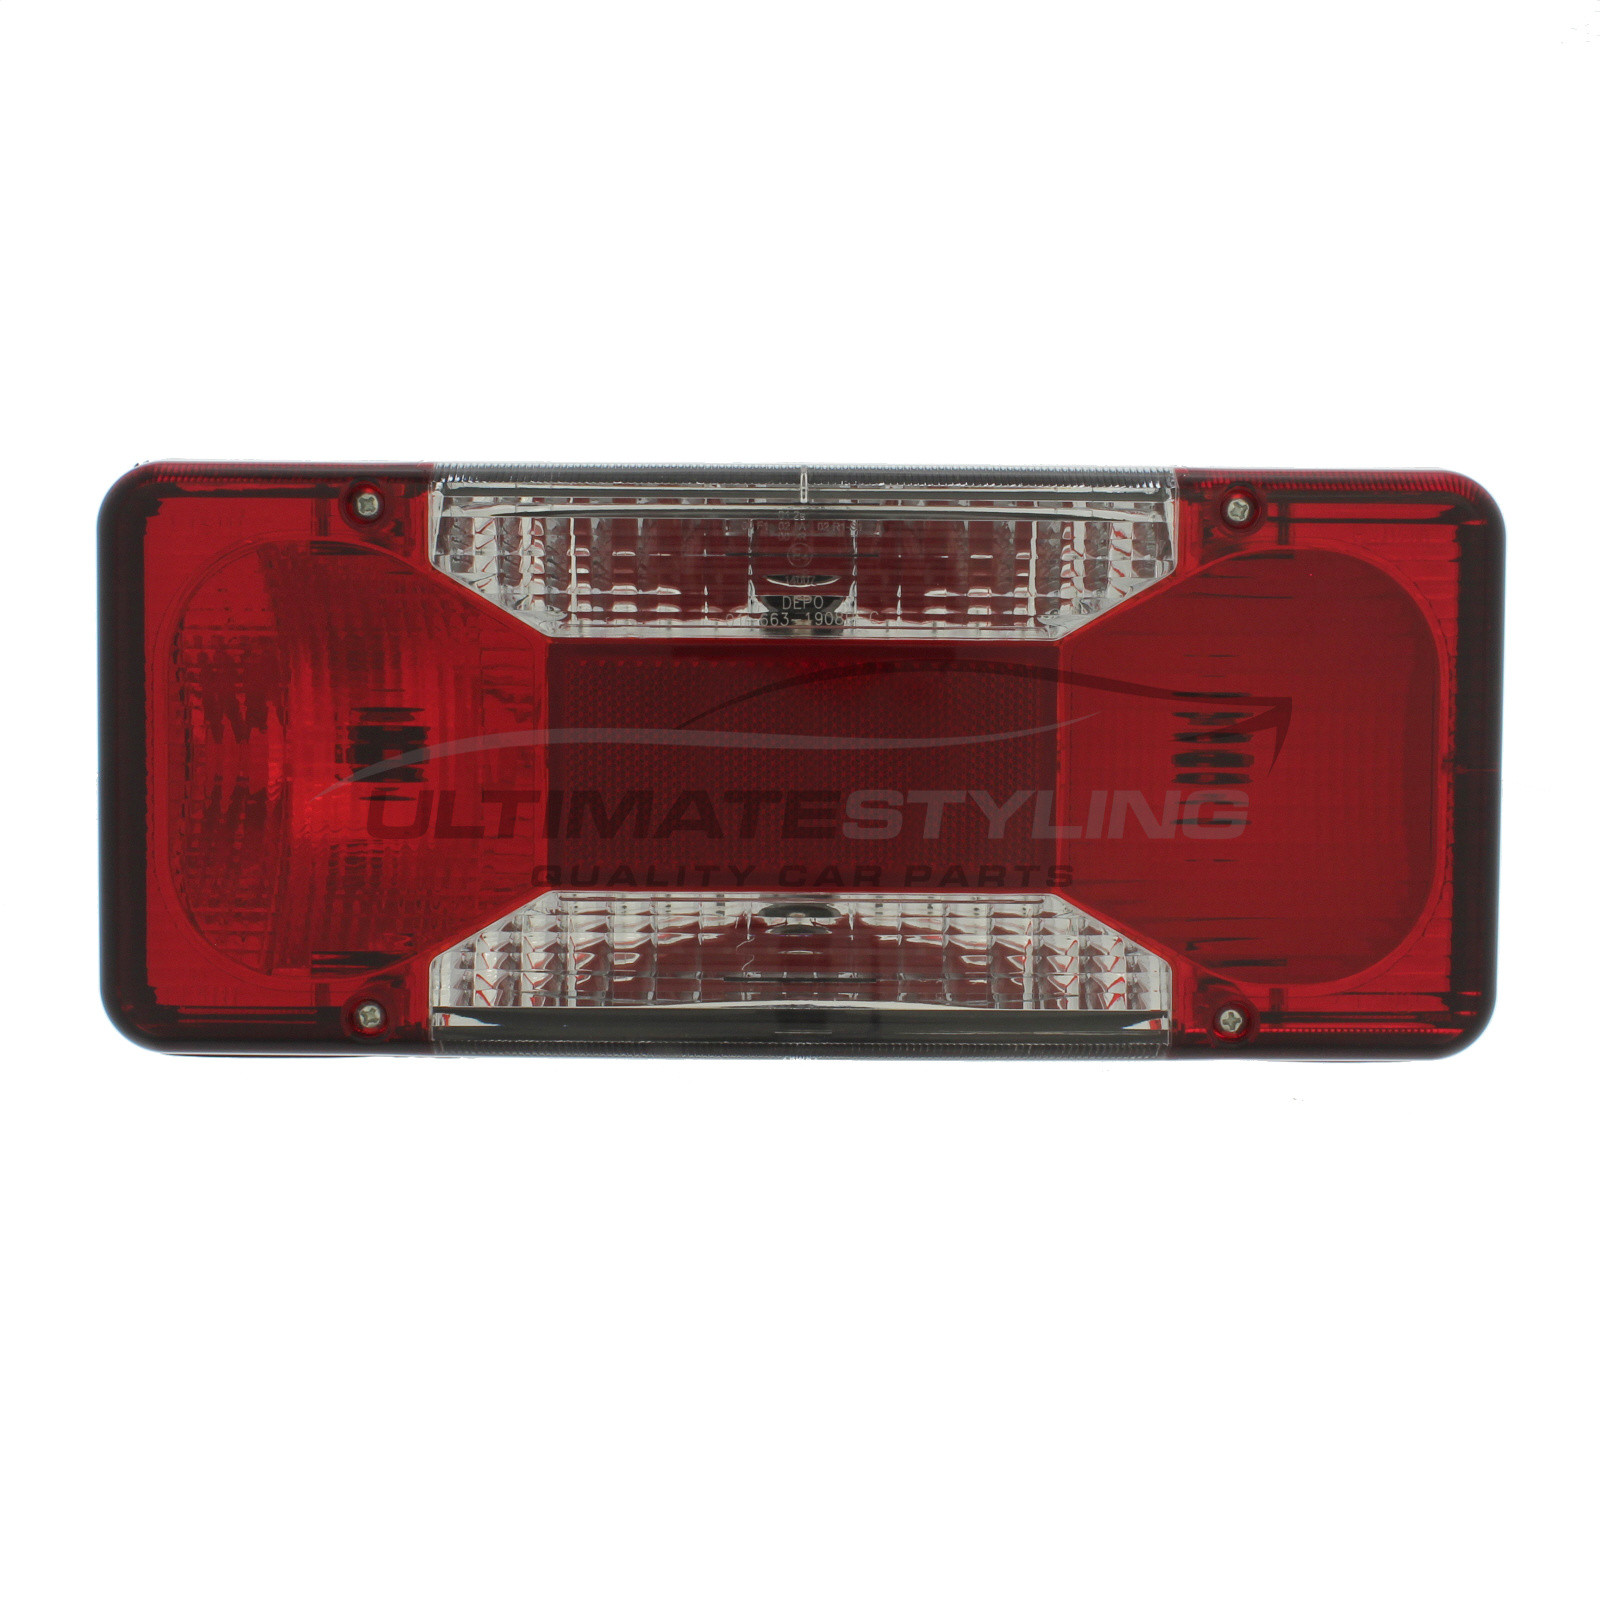 Fiat Doblo, Iveco Daily Rear Light / Tail Light - Complete - Drivers Side (RH), Rear - Non-LED